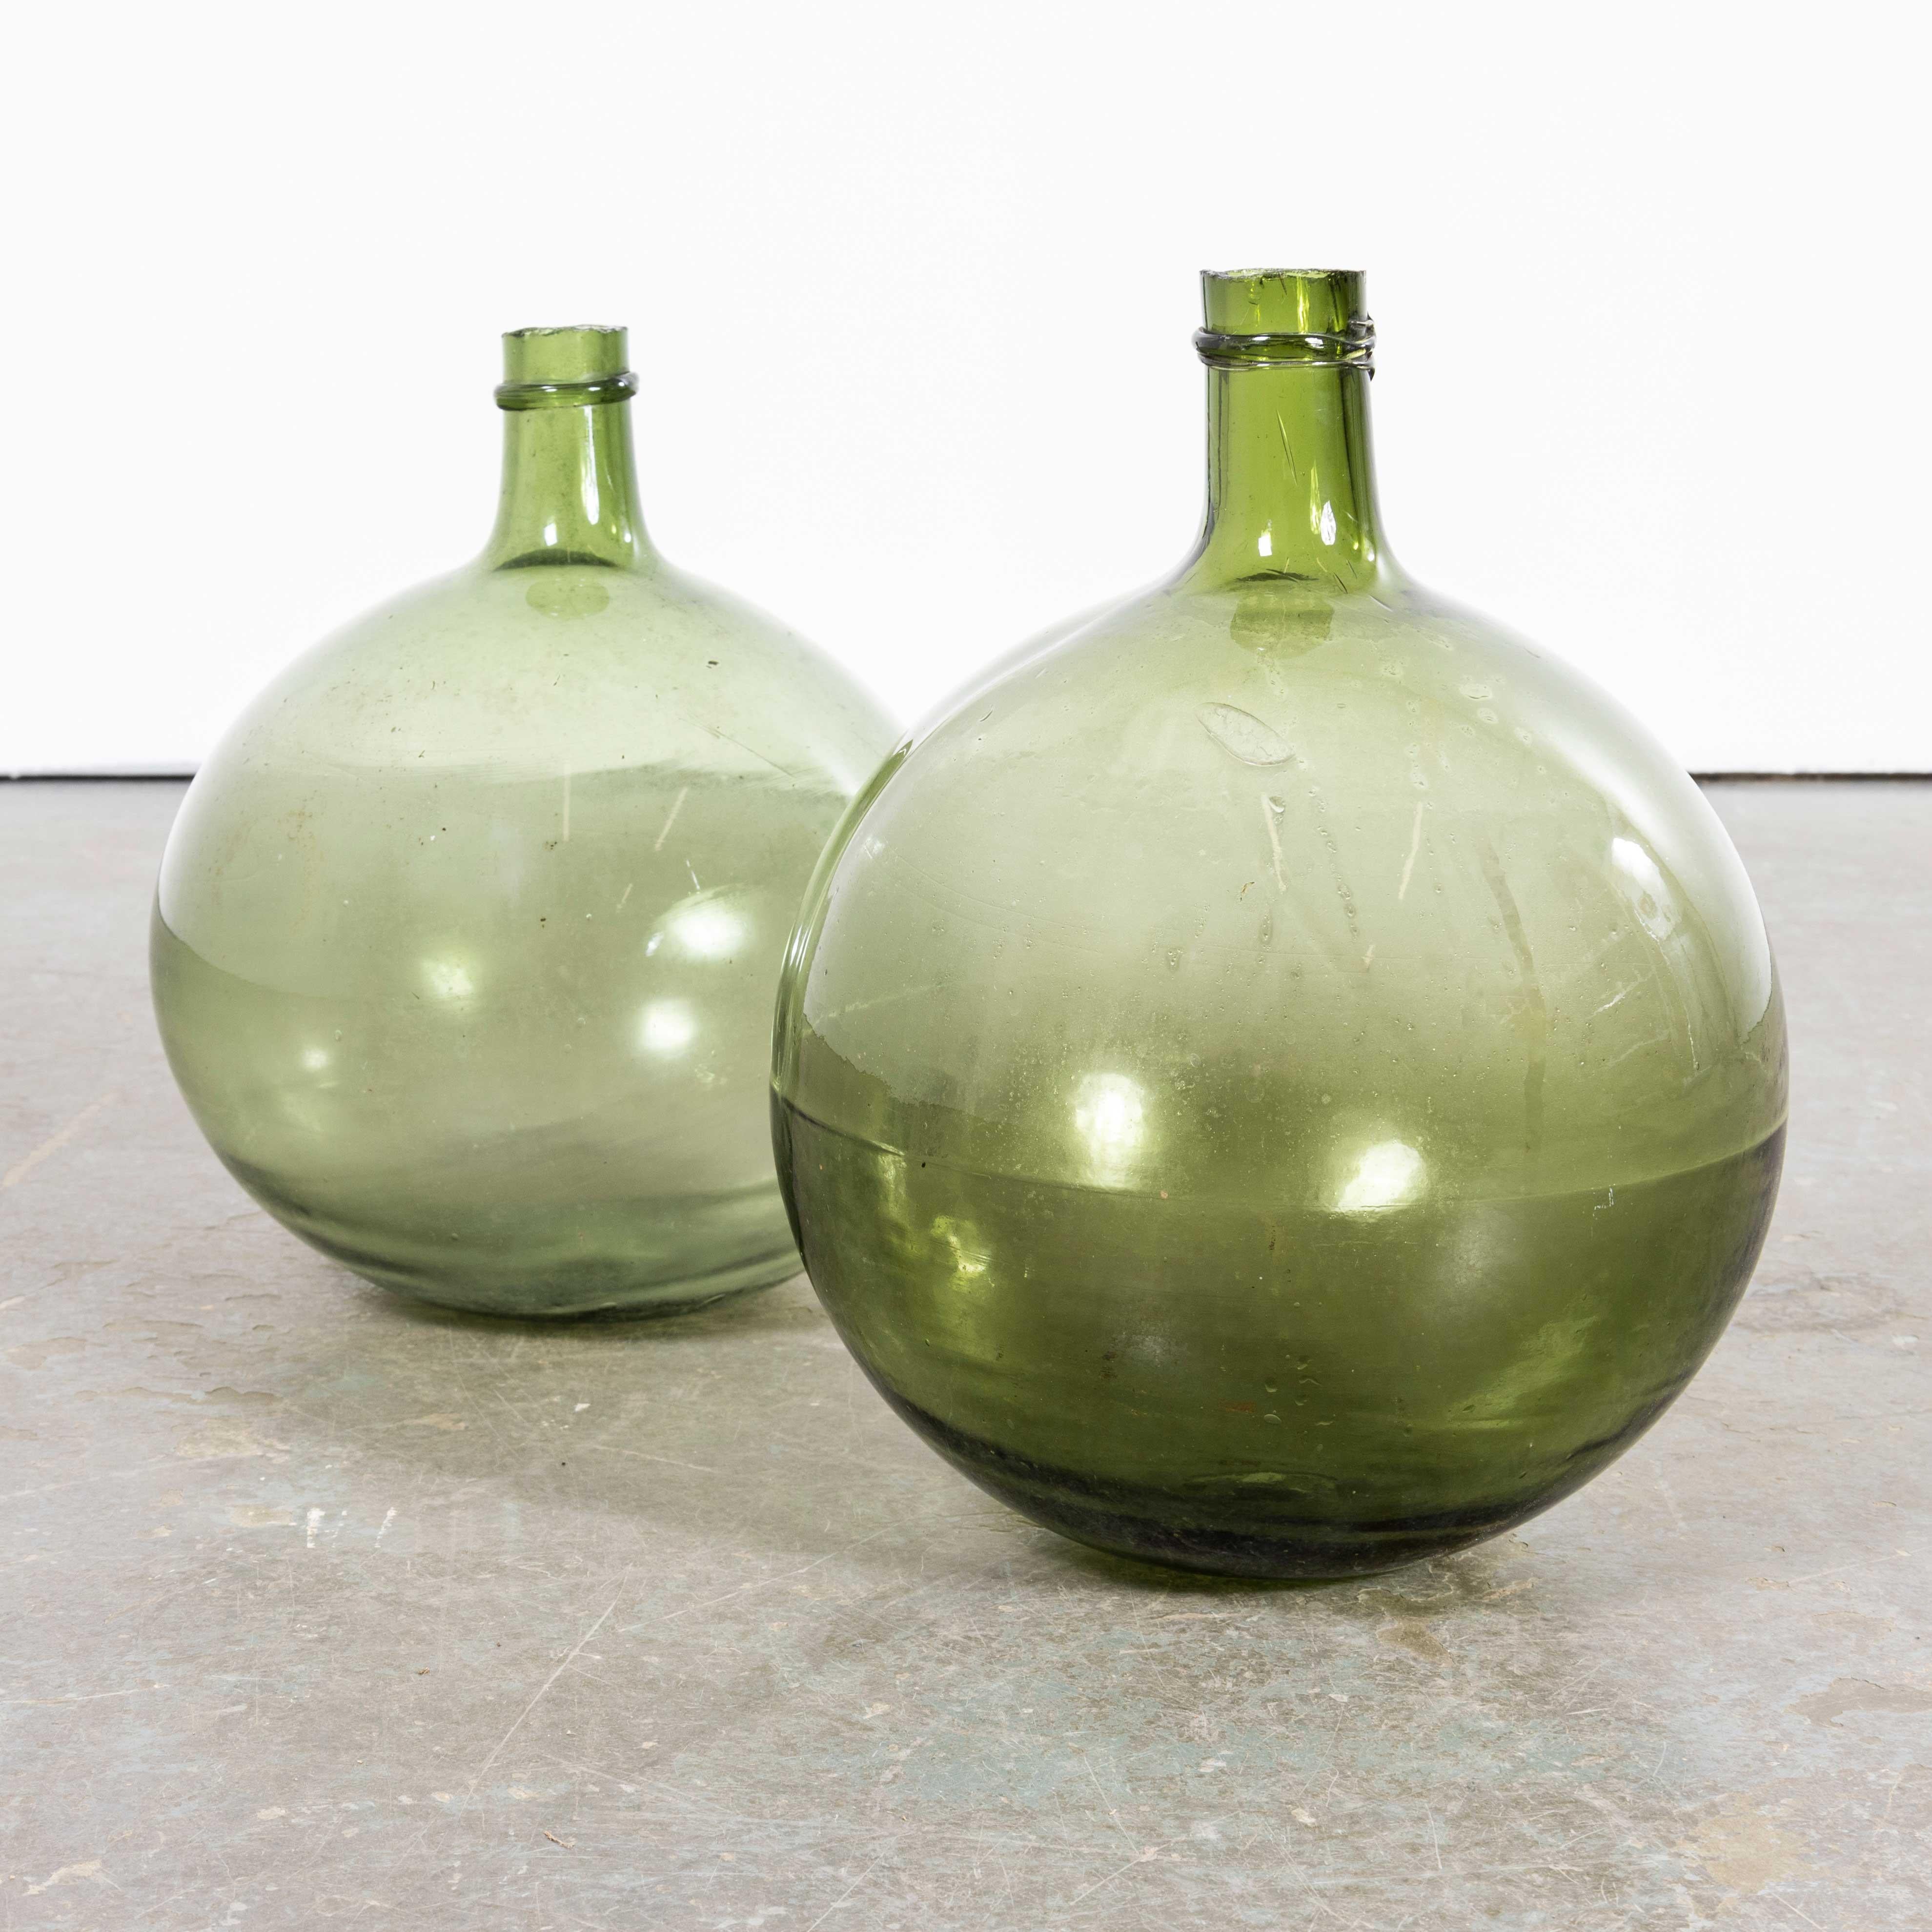 Vintage French Glass Demijohns - Pair (957.24) For Sale 1